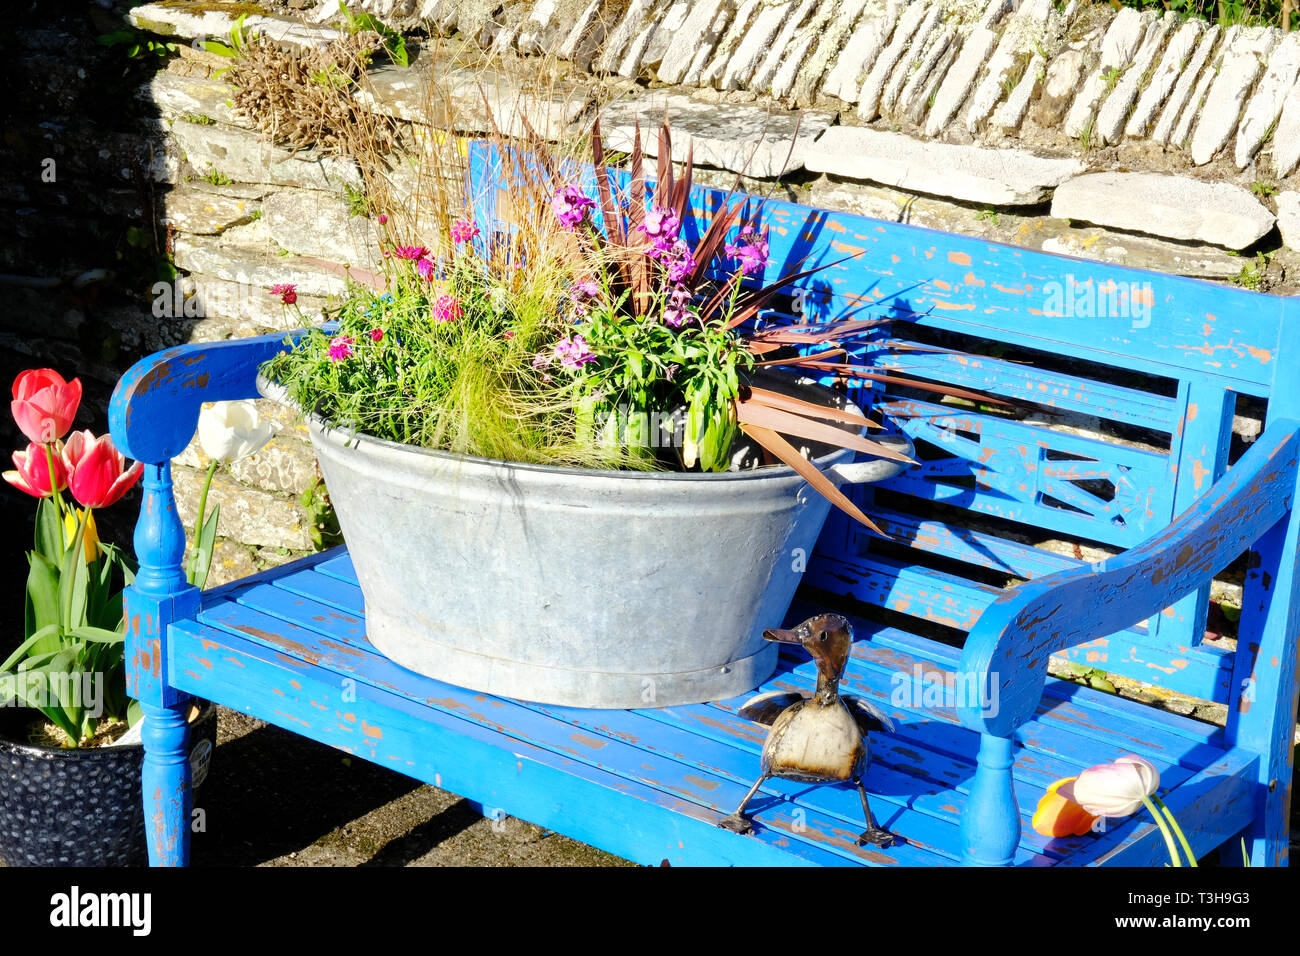 Tin bath holding a variety of plants resting on a blue bench - John Gollop Stock Photo